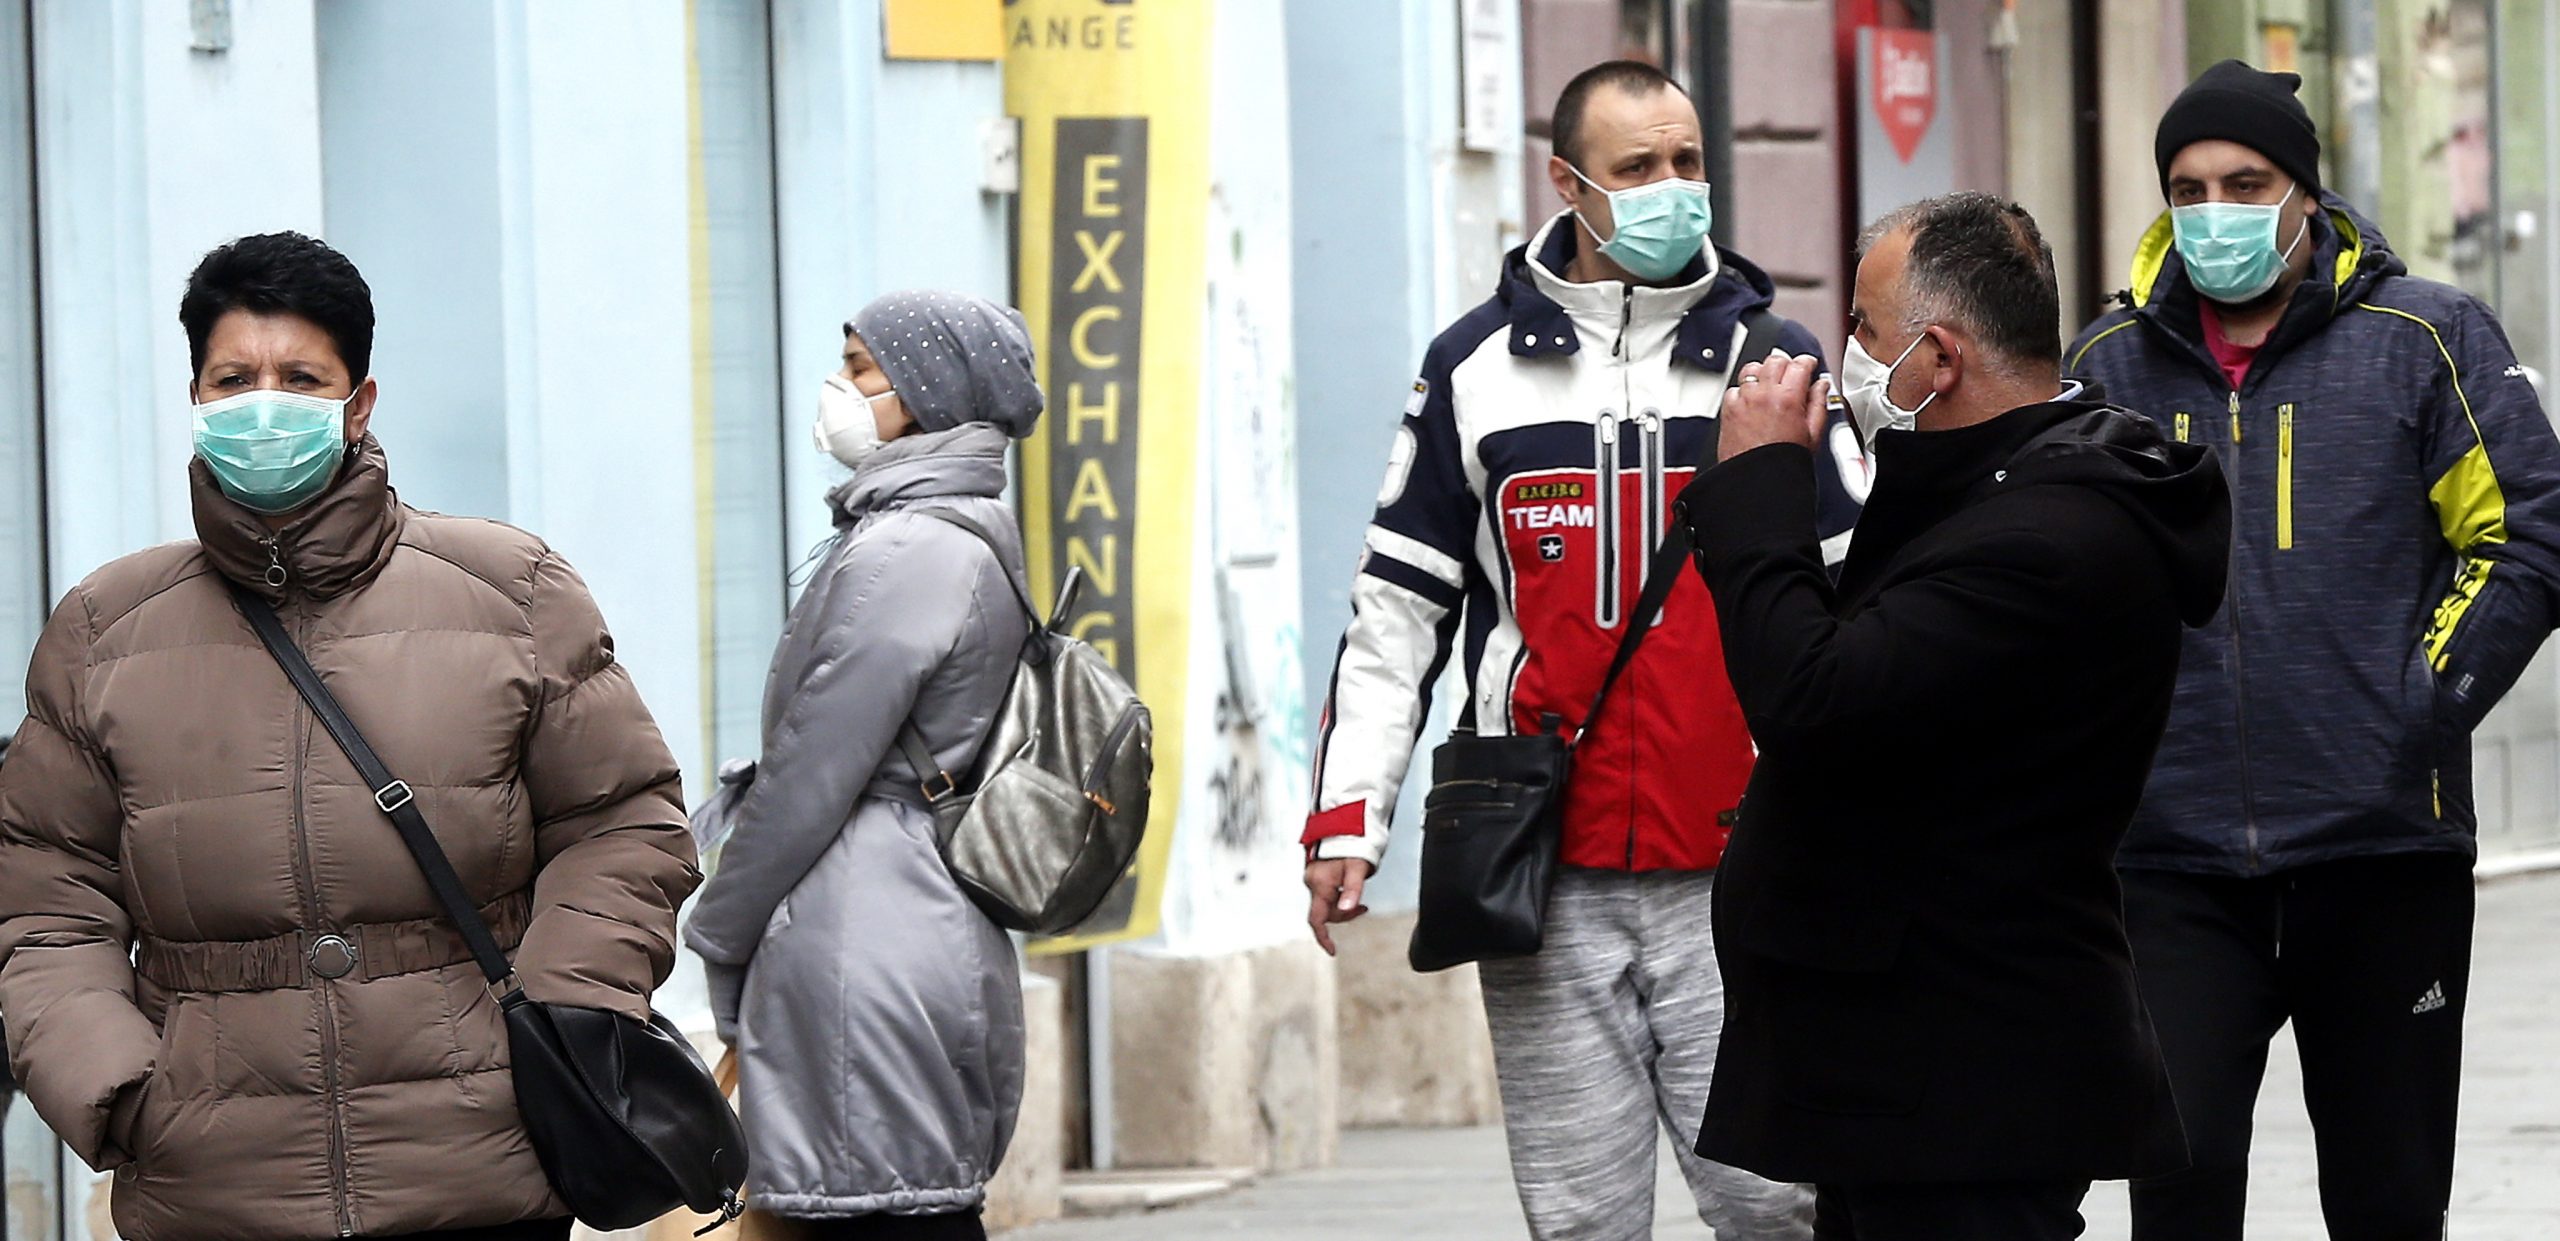 epa08324279 People wearing face masks walk in a street of on Sarajevo, Bosnia and Herzegovina, 26 March 2020. Several European countries have closed borders, schools, public facilities, and have canceled most major sports and entertainment events, in order to prevent the spread of the SARS-CoV-2 coronavirus, which causes the COVID-19 disease.  EPA/FEHIM DEMIR